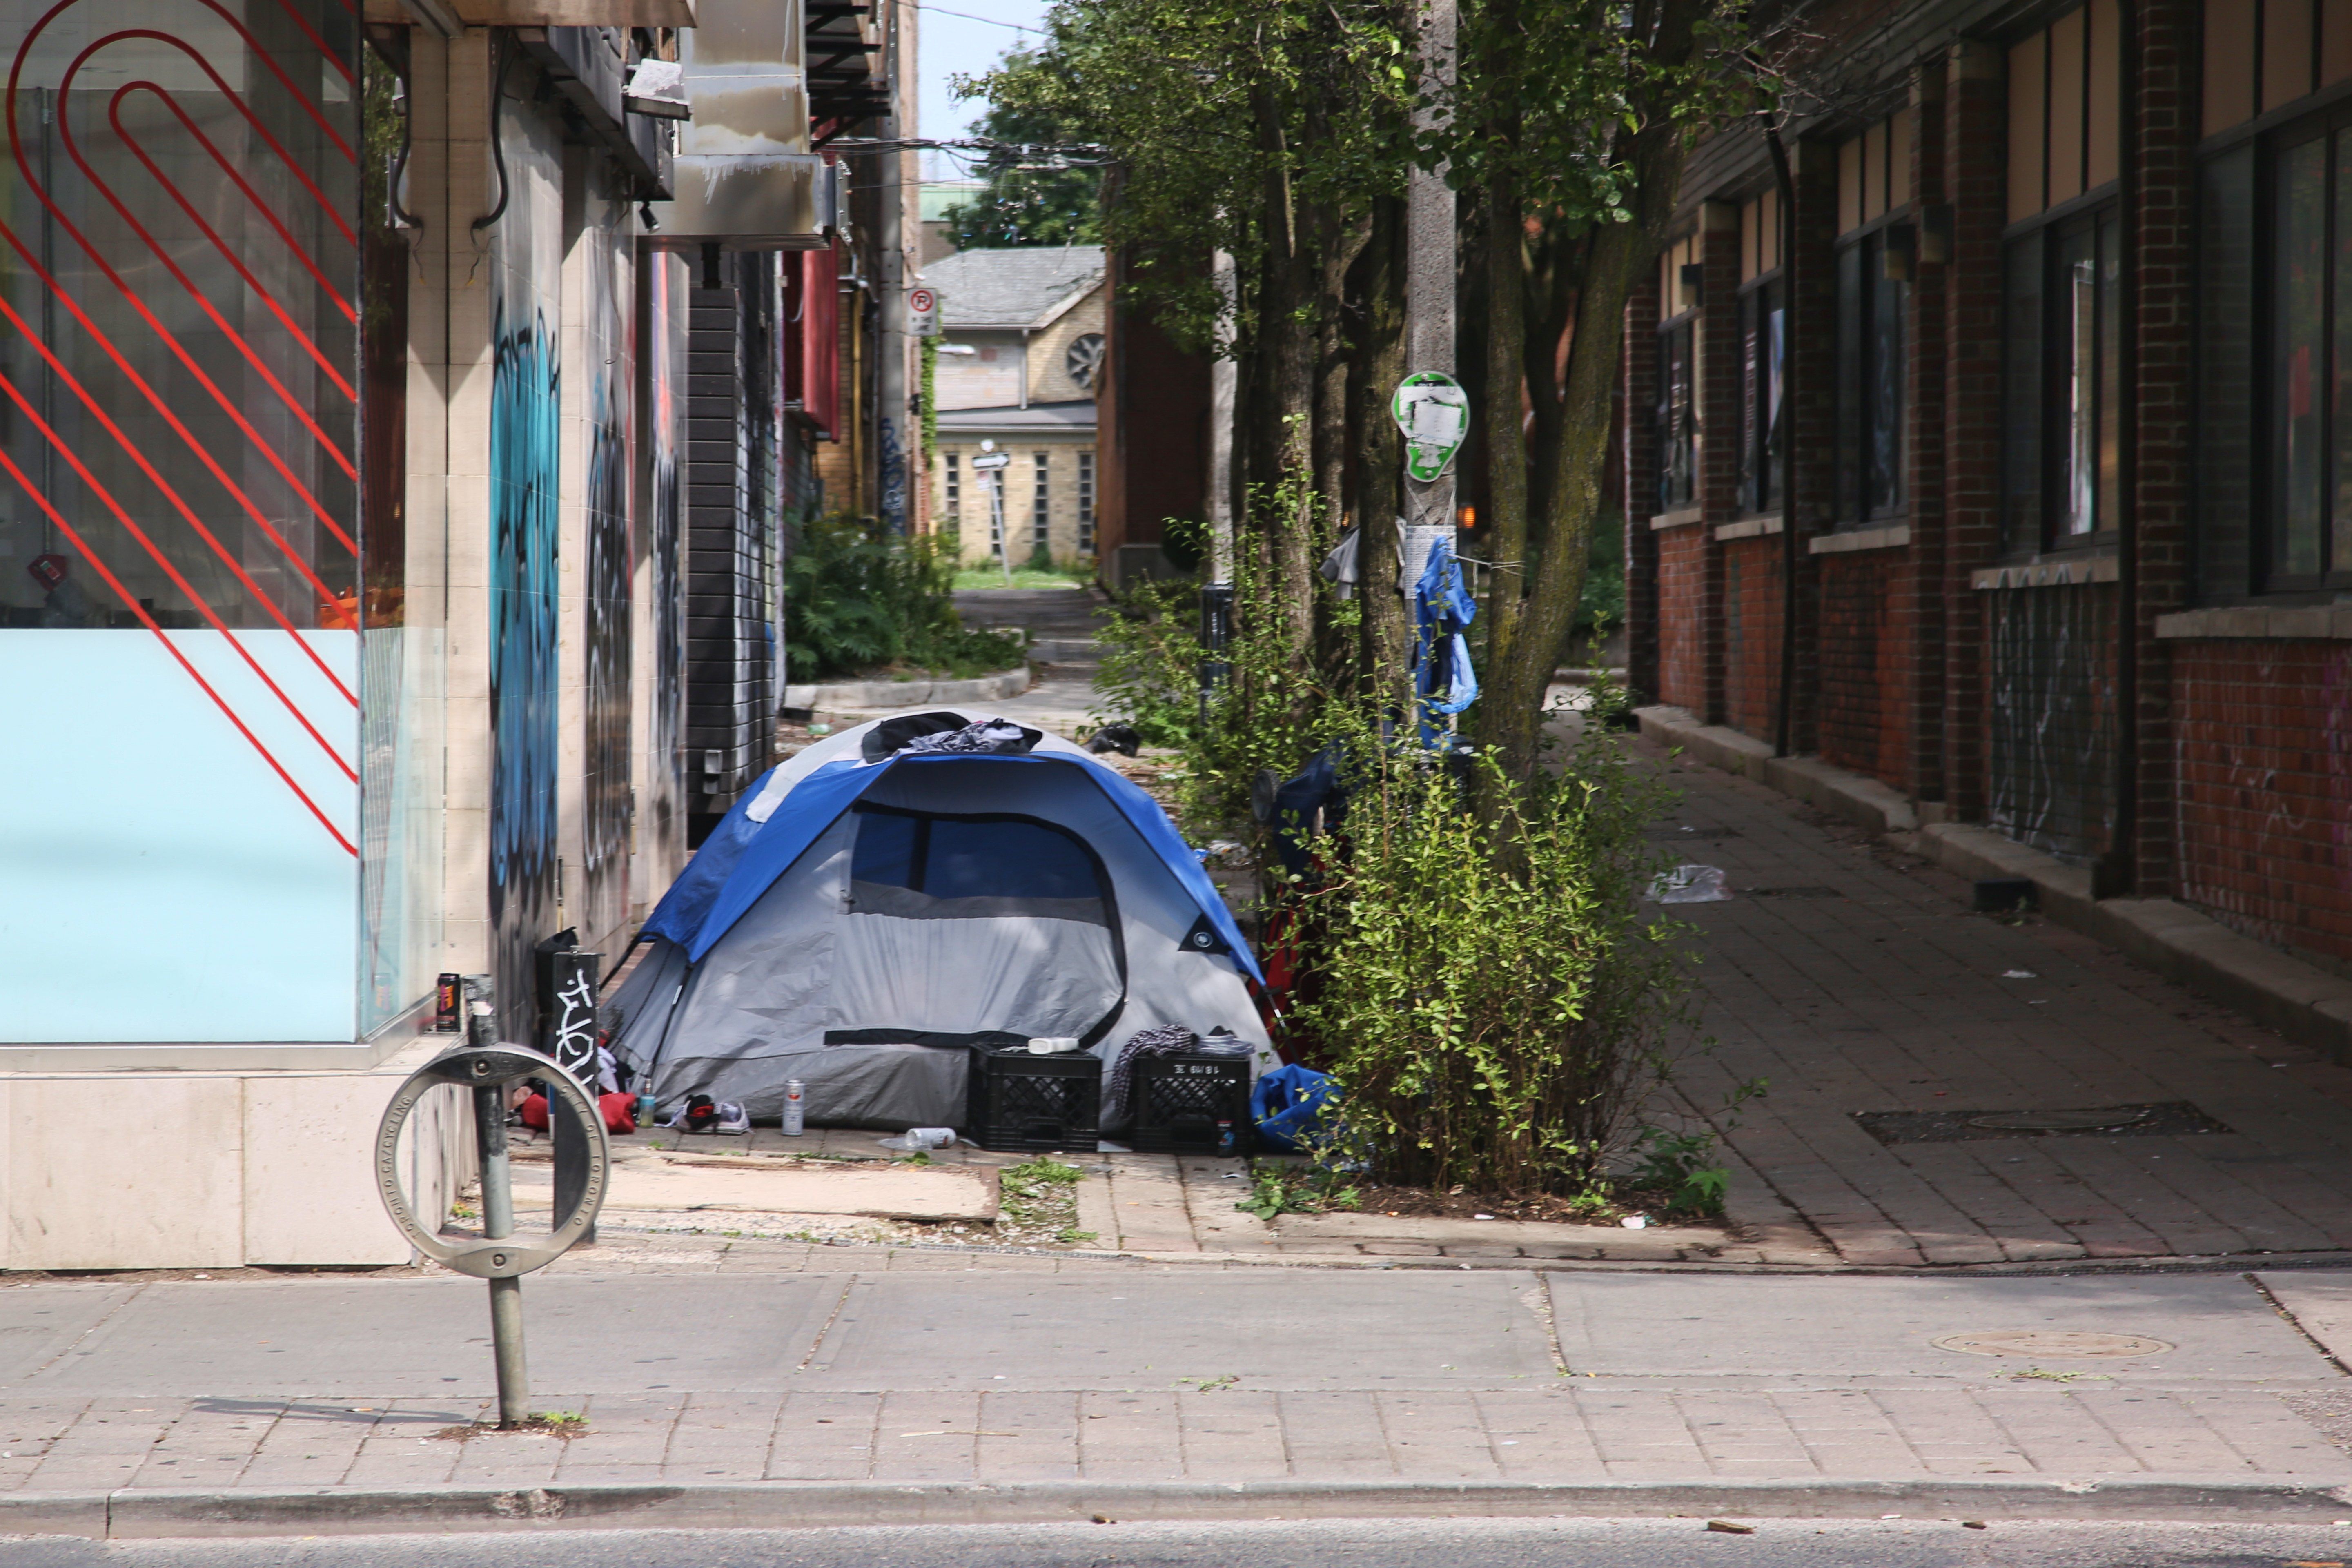 A homeless man's tent is seen in an alley in downtown Toronto, Ontario.